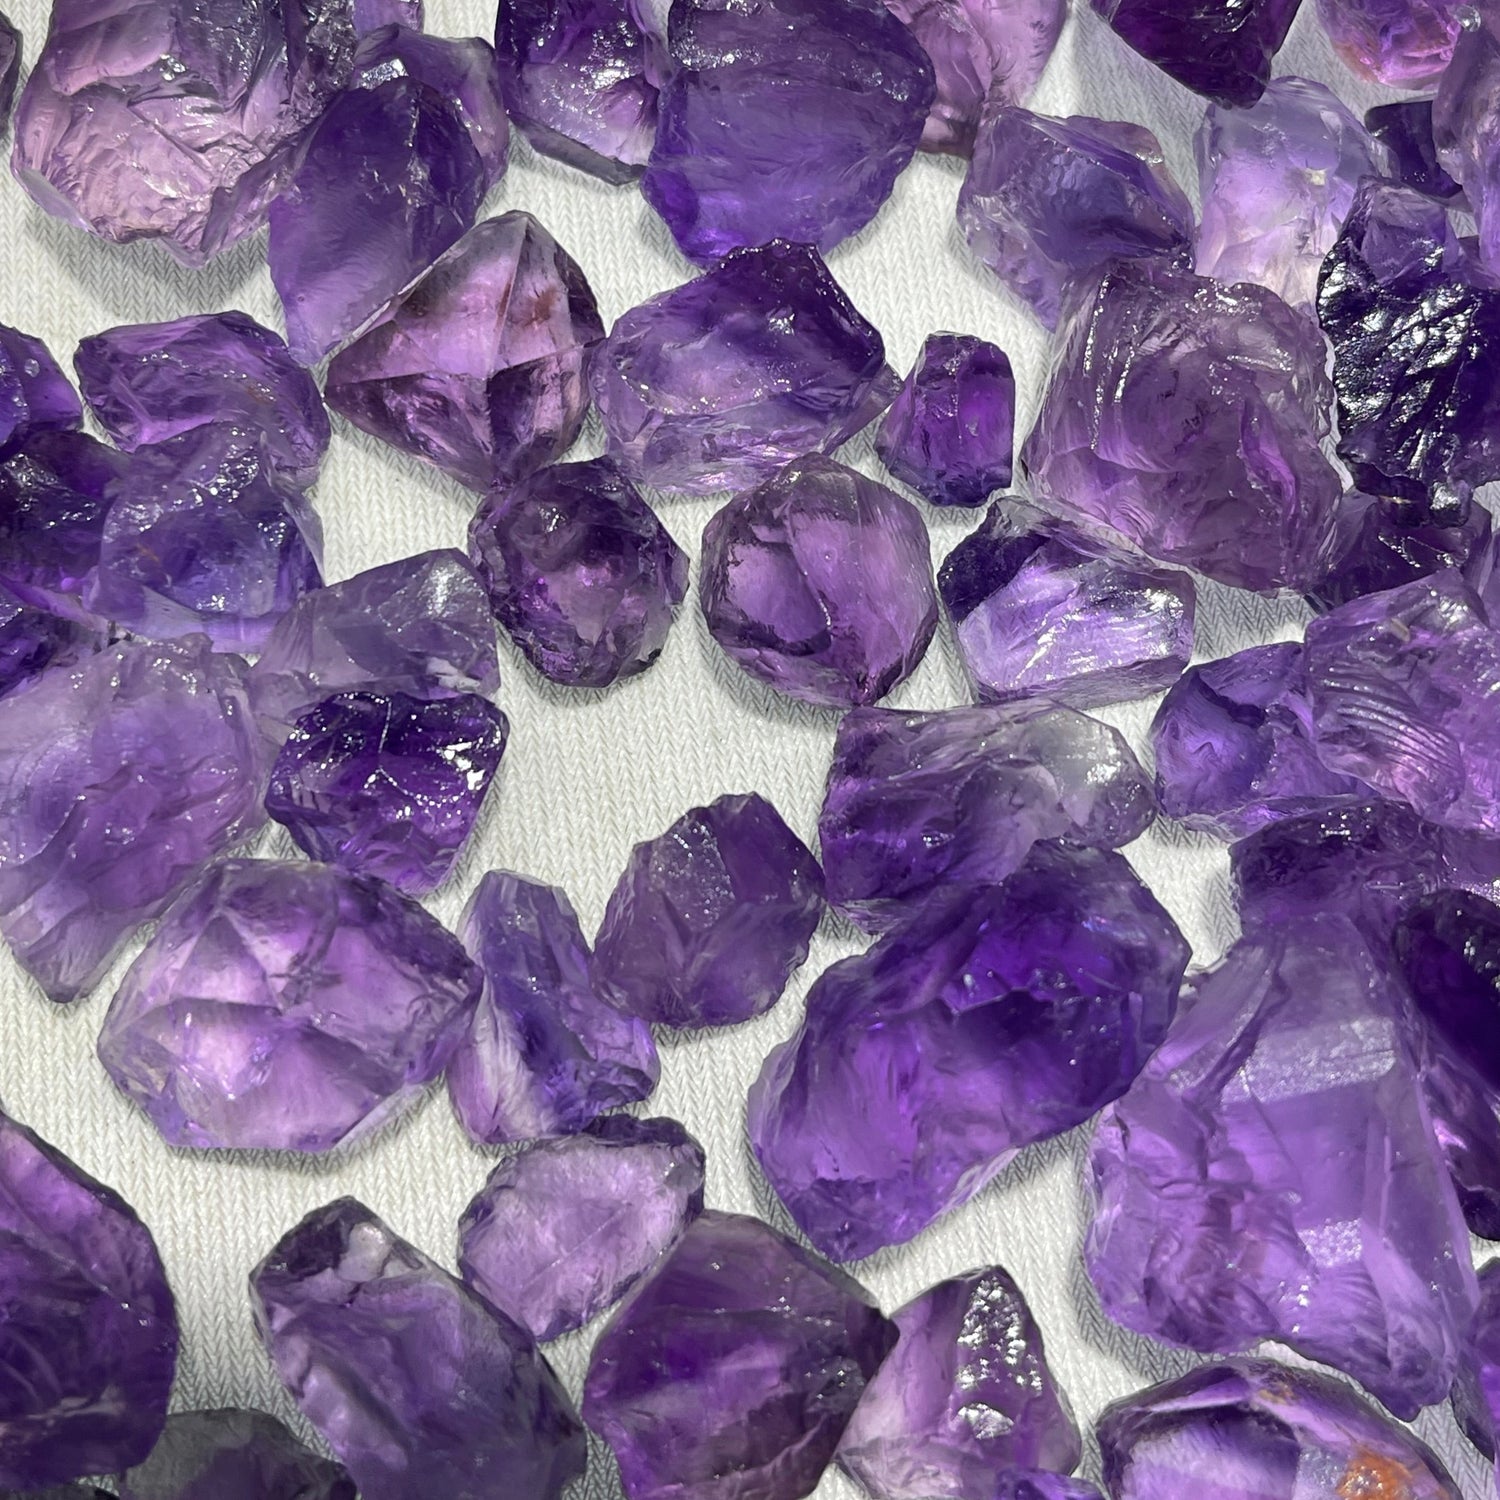 Natural Rough amethyst gemstone for Cutters